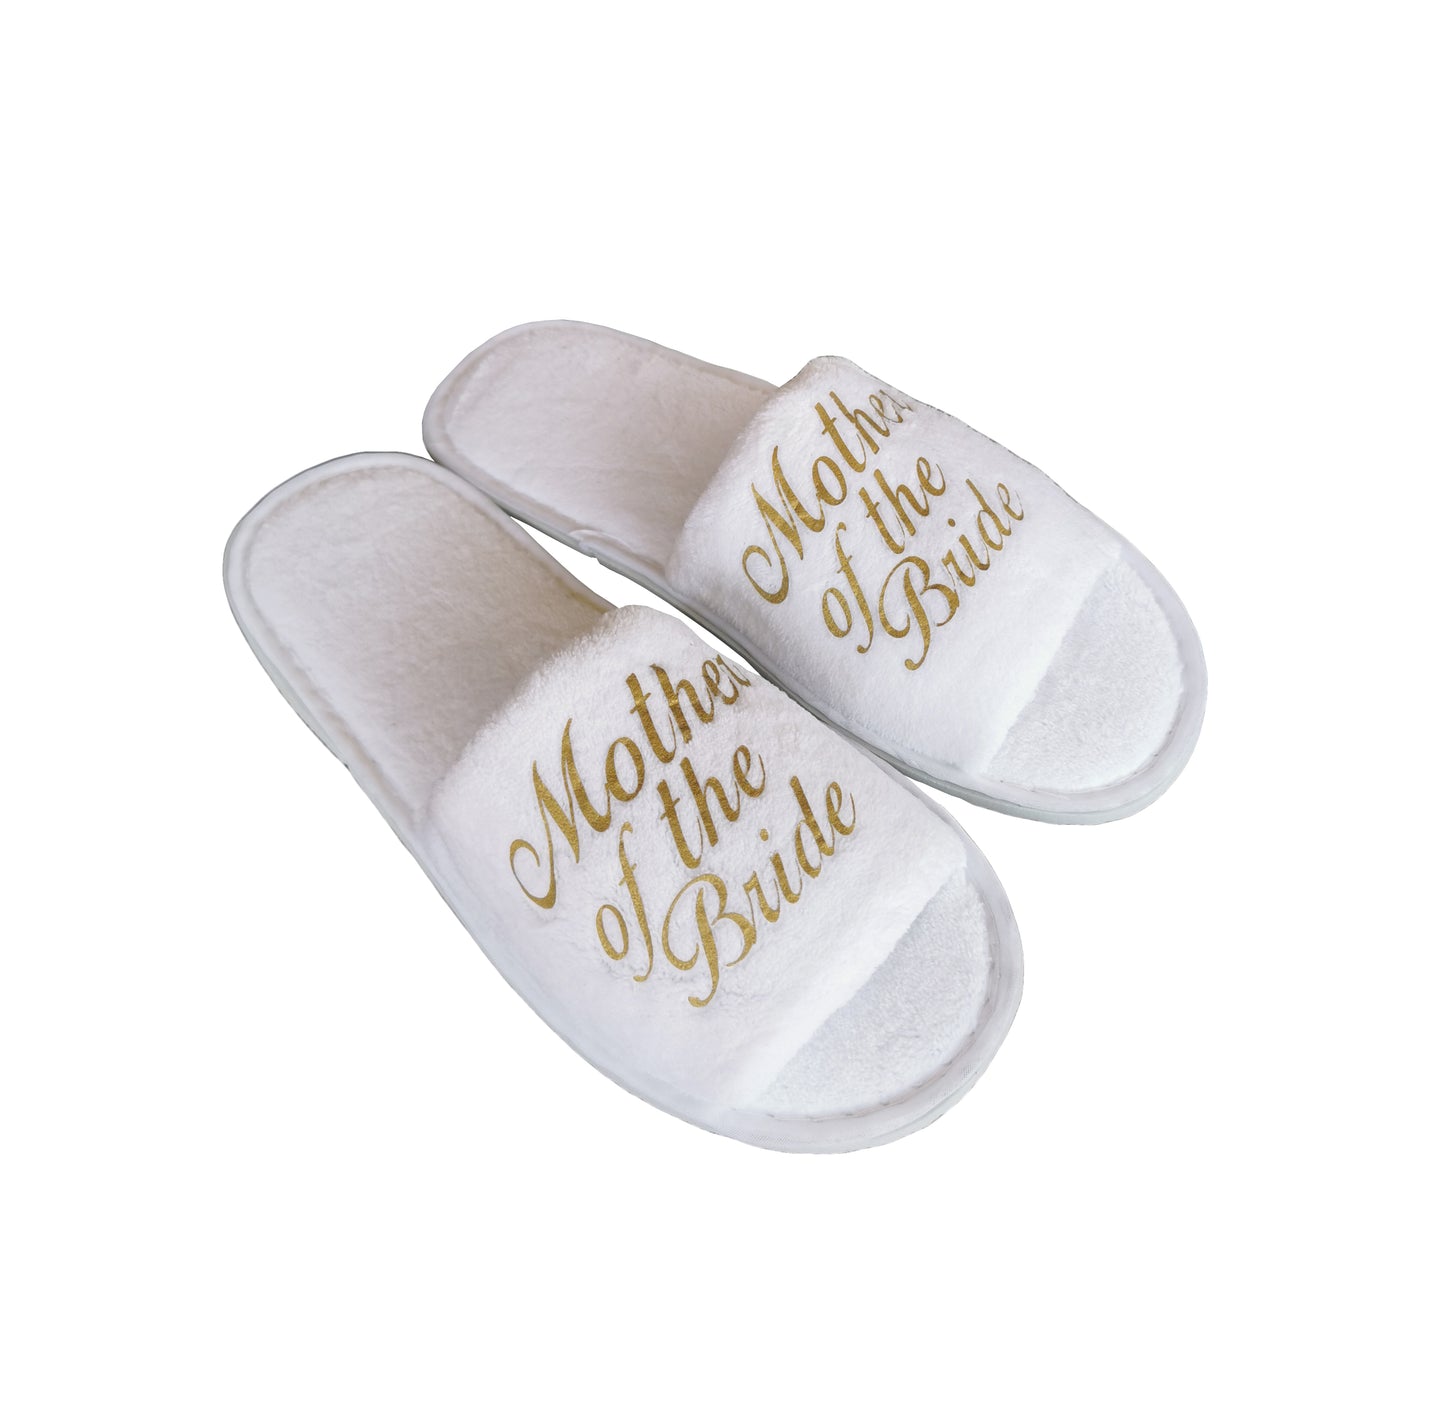 Mother of the Bride Slippers